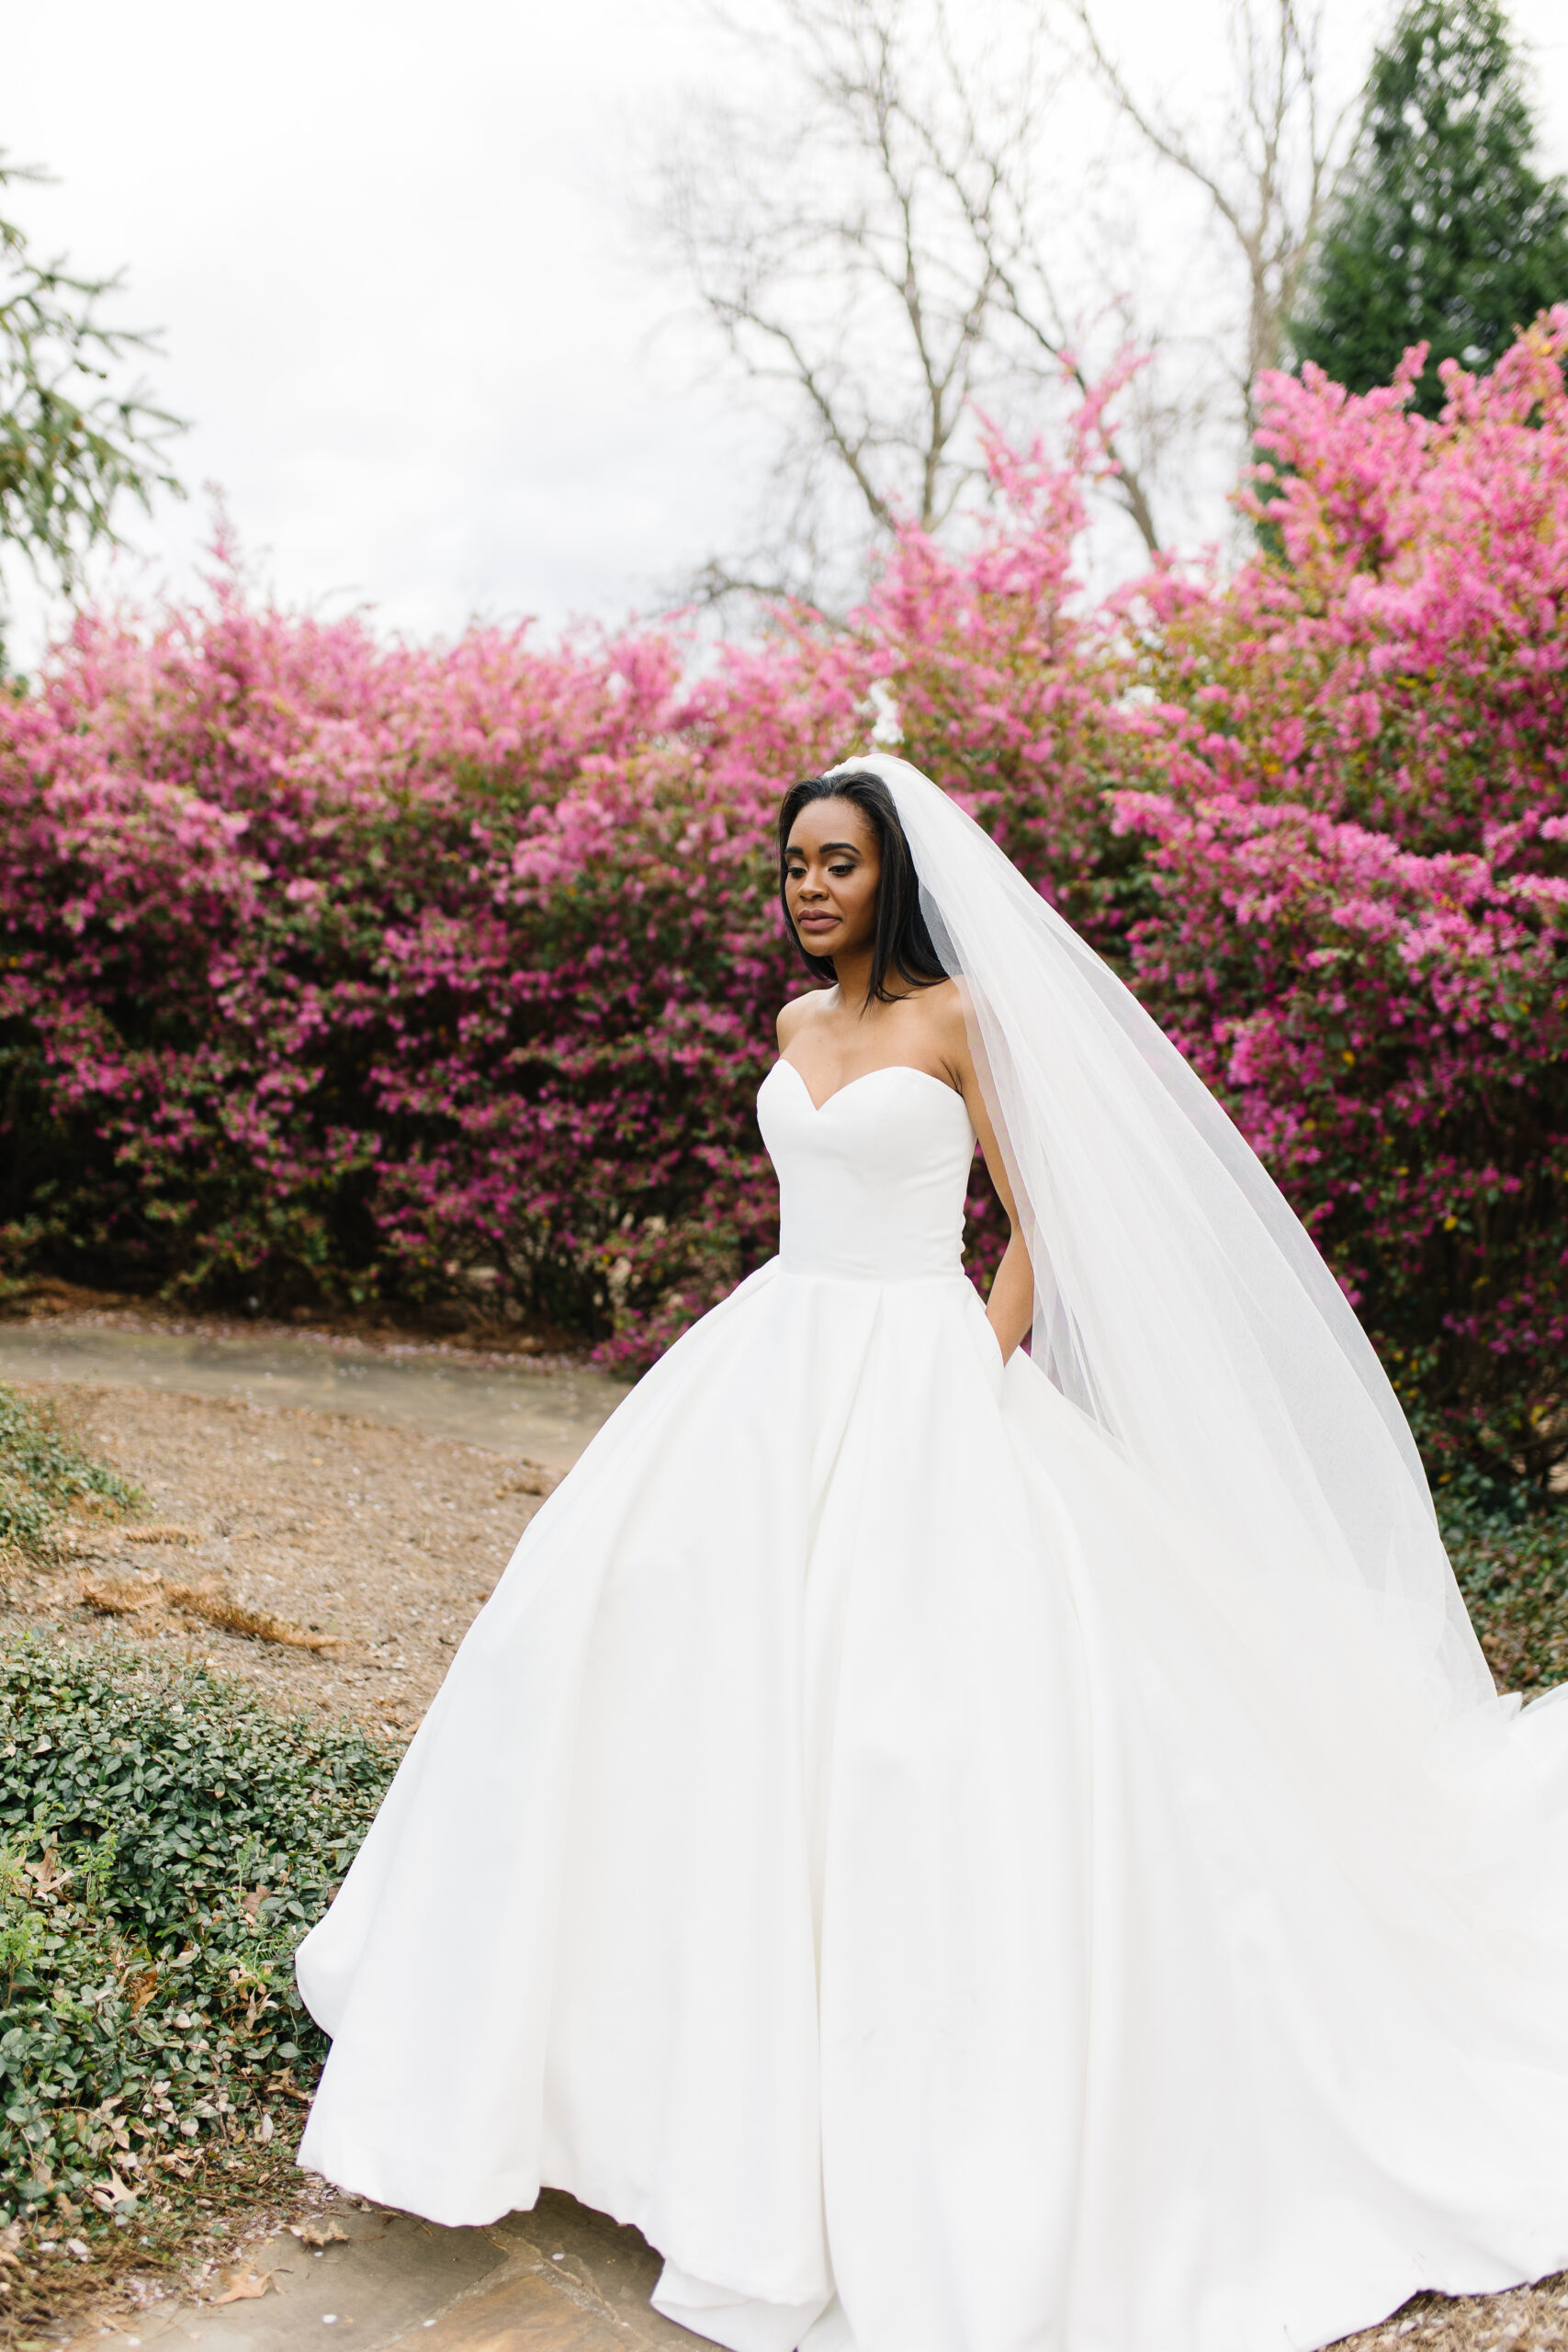 14 Things to Do With Your Wedding Dress After the Big Day | Wedding Spot  Blog